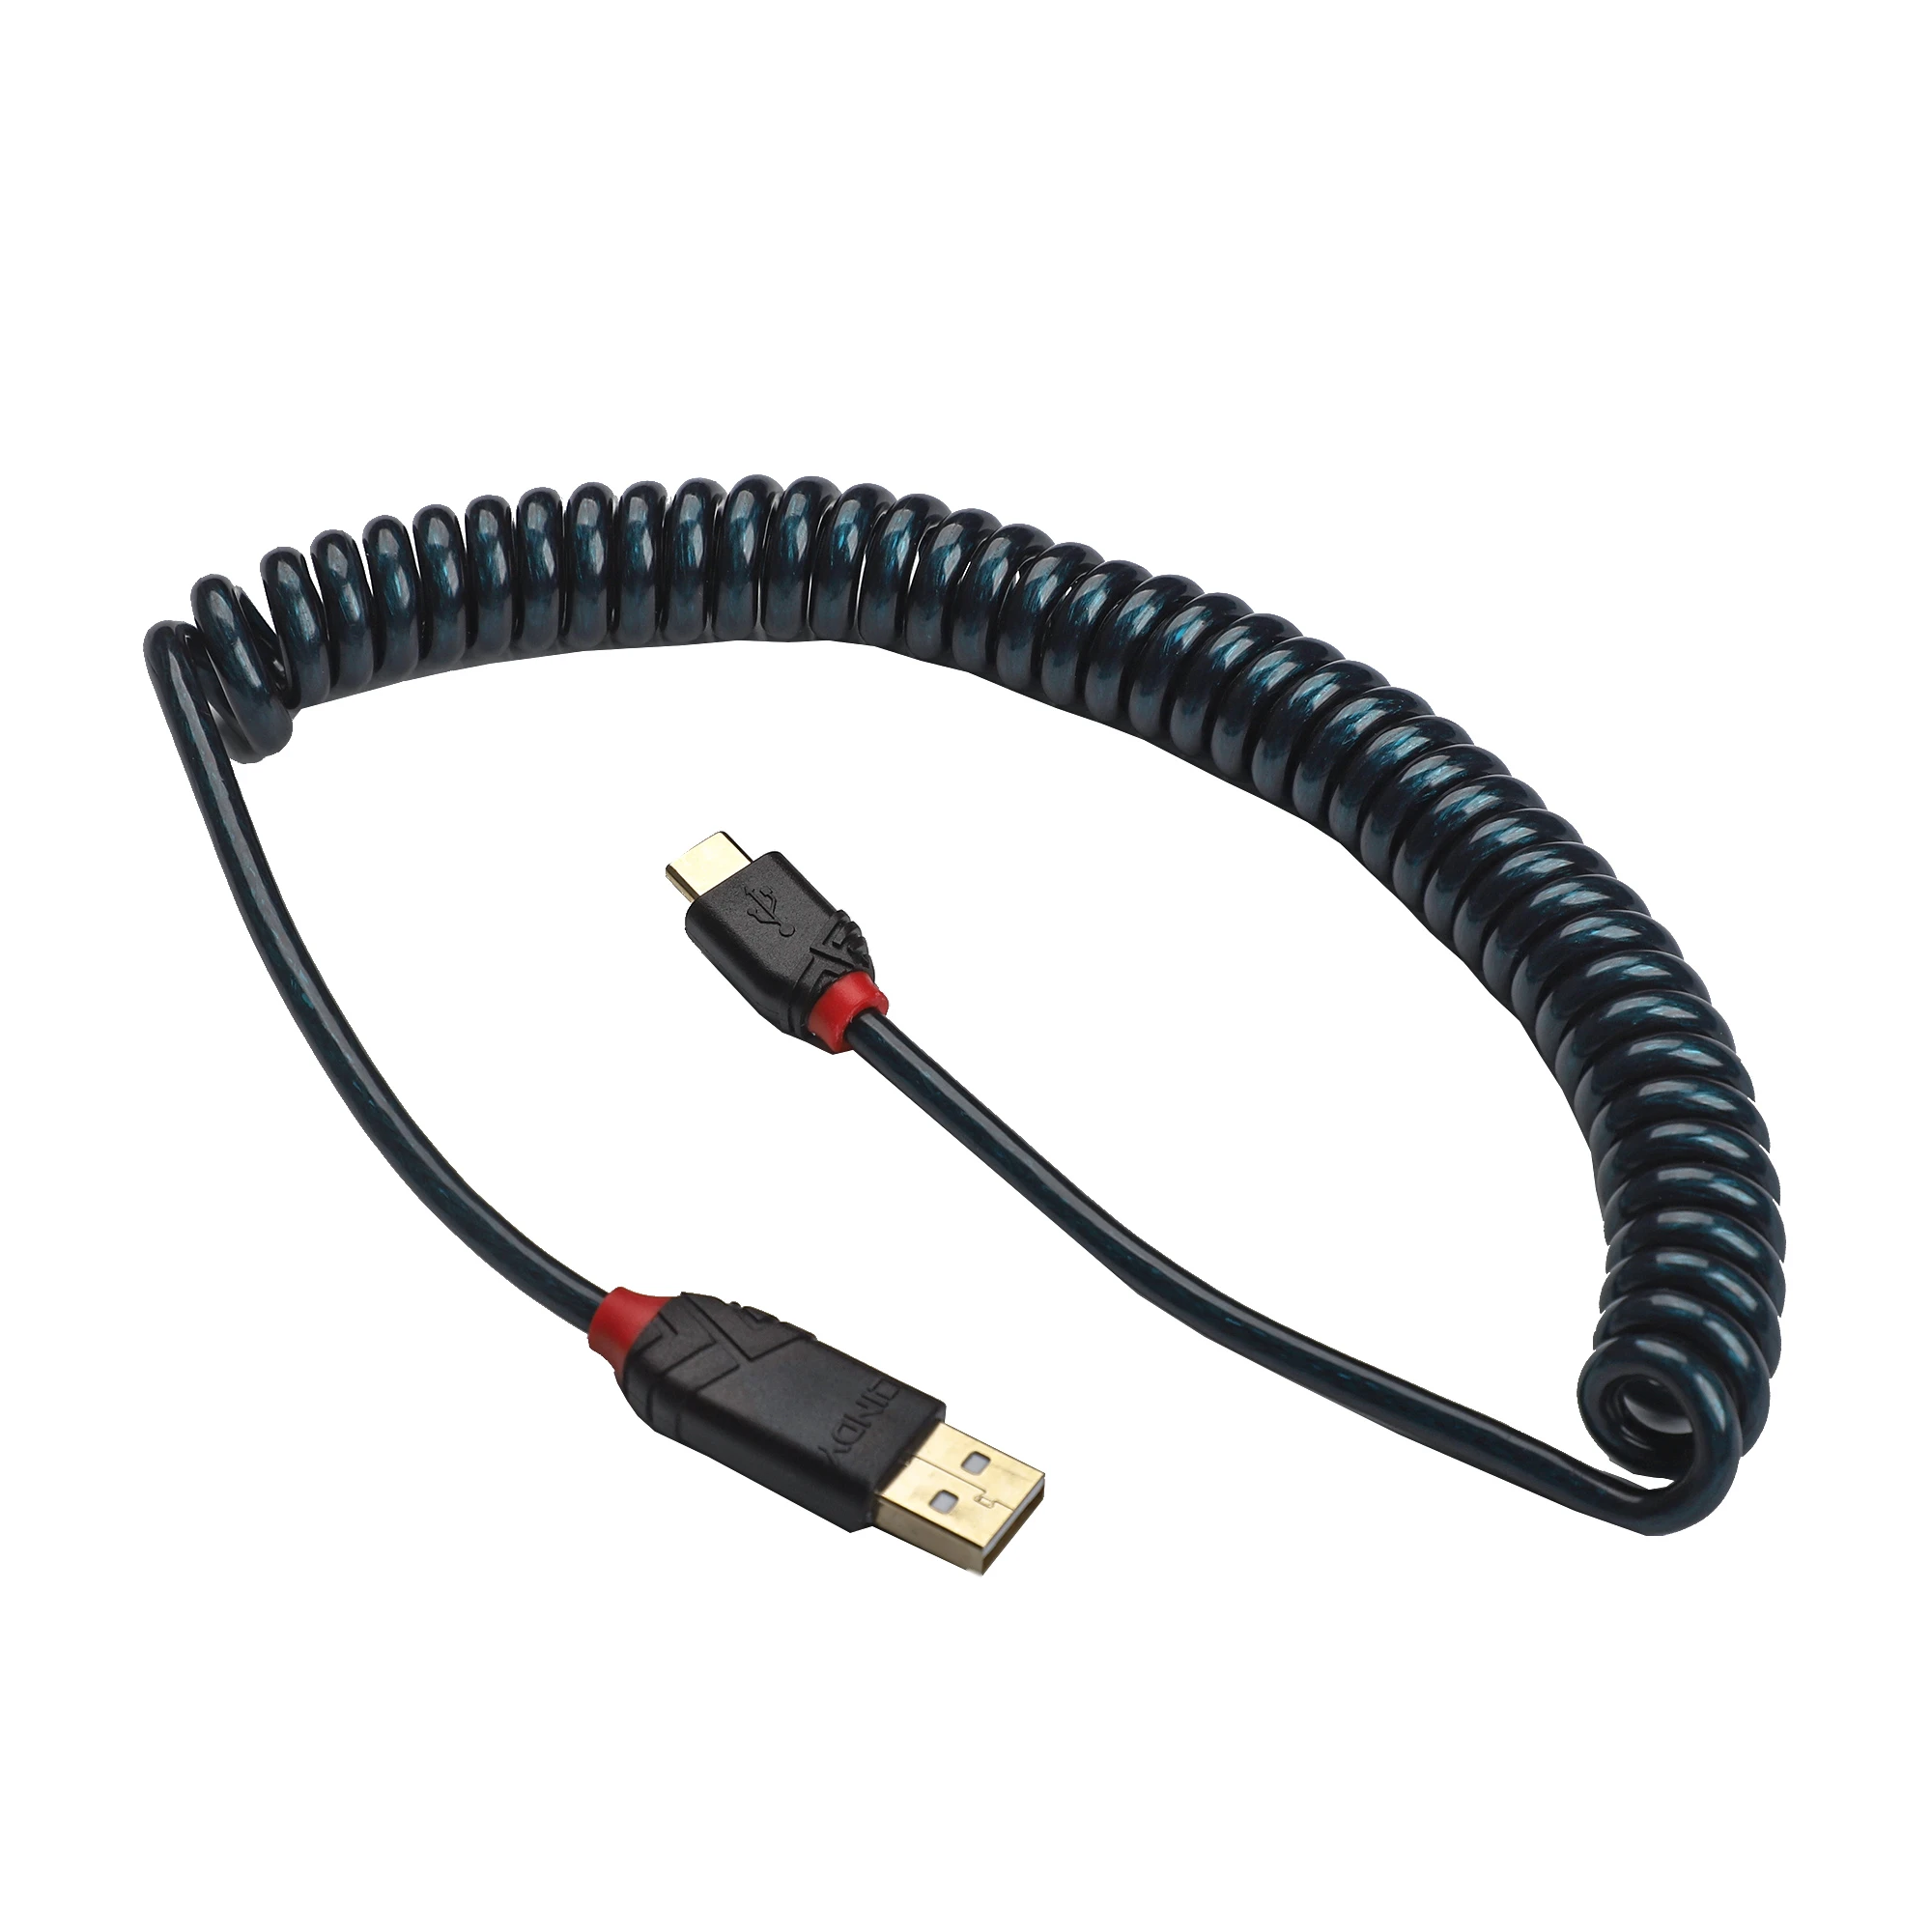 biograf Interconnect Det Lindy Type A To C USB Cable High Quality Durable Data Line 2 Meter Coiled  Spring Cable For Mechanical Keyboard GMMK Keychron|Keyboards| - AliExpress